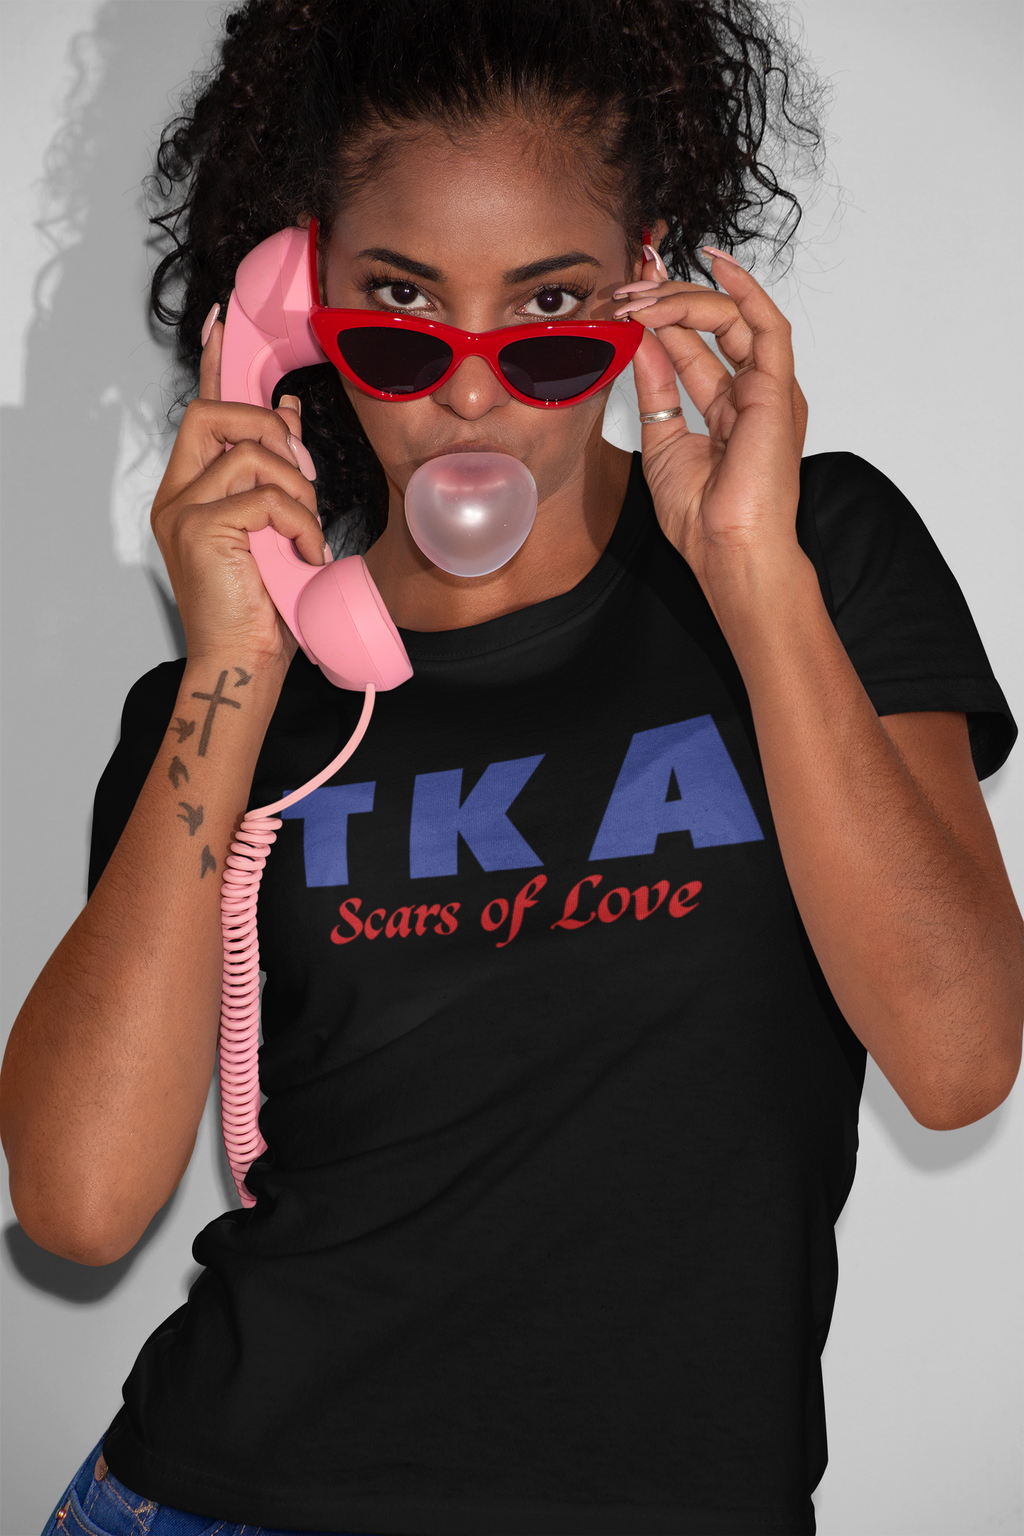 Scars of Love Retro Logo Tee, brought to you by "TONYTKA"